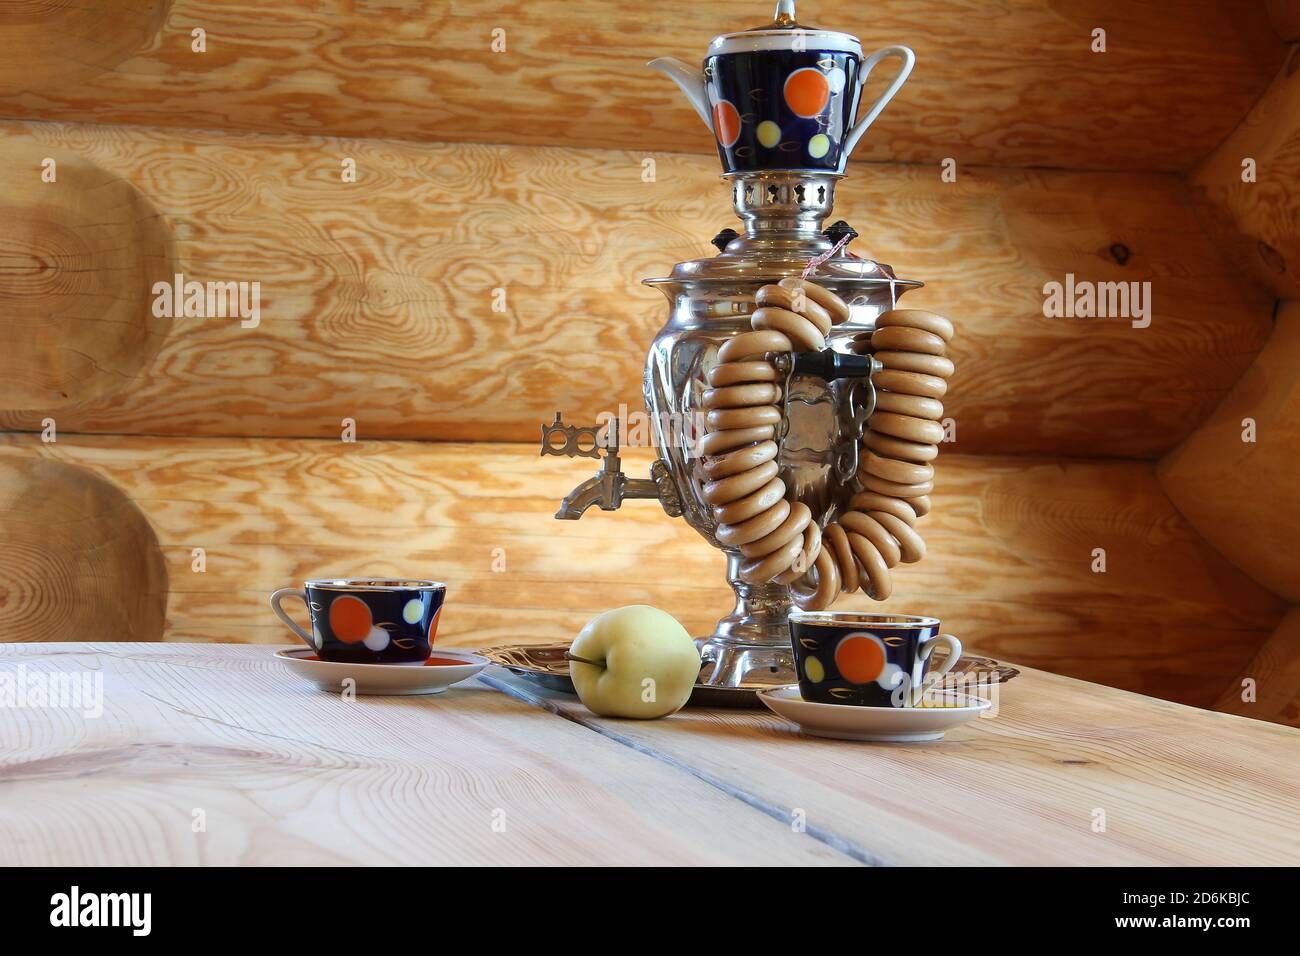 Russian traditional tea-drinking samovar on a wooden table in the sauna Stock Photo